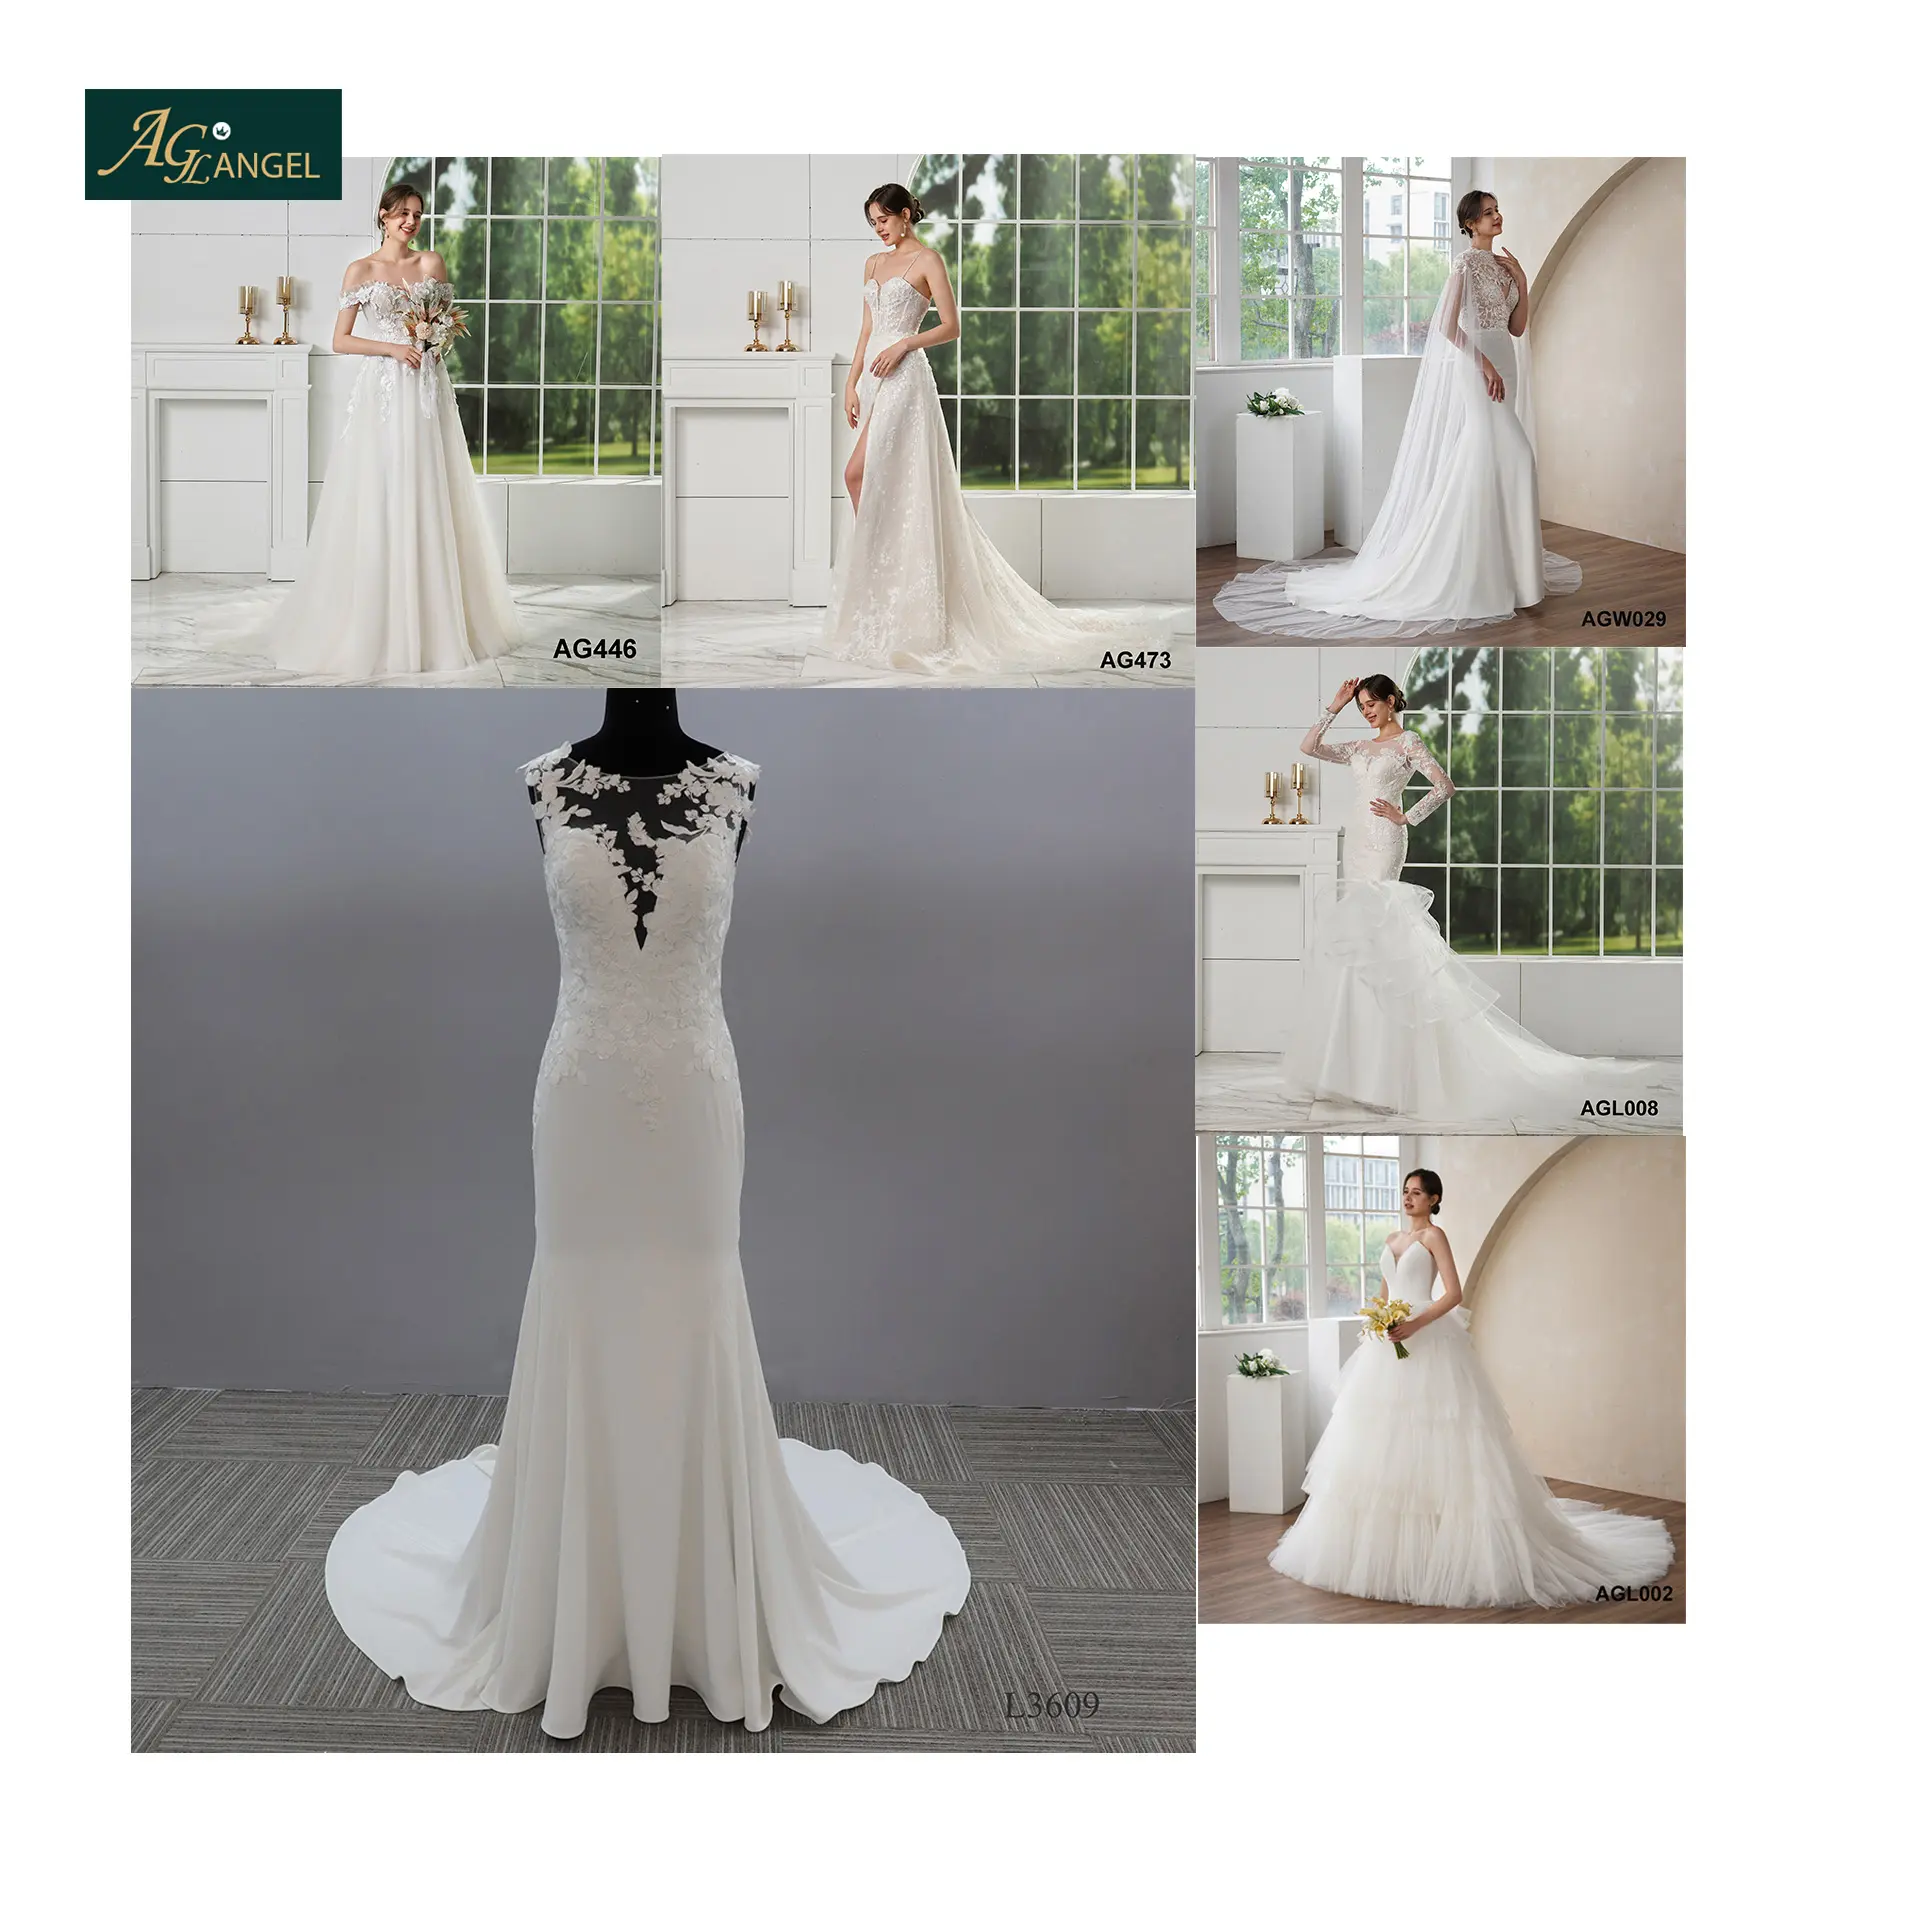 style fabric lace backless moroccan mermaid crepe wedding dress with detachable sleeve